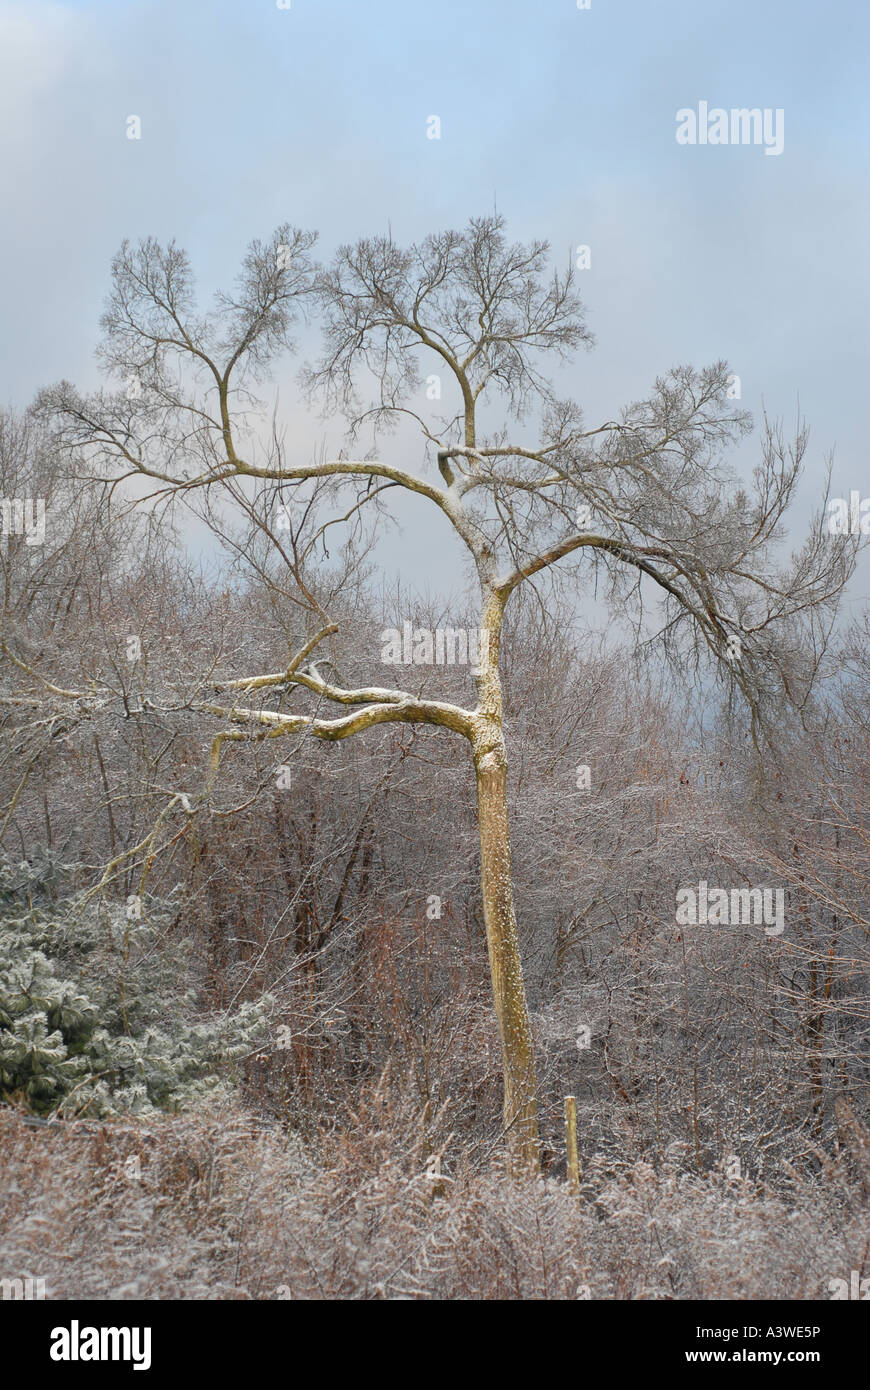 Snow covered tree delicate winter scenic, color landscape photography Stock Photo